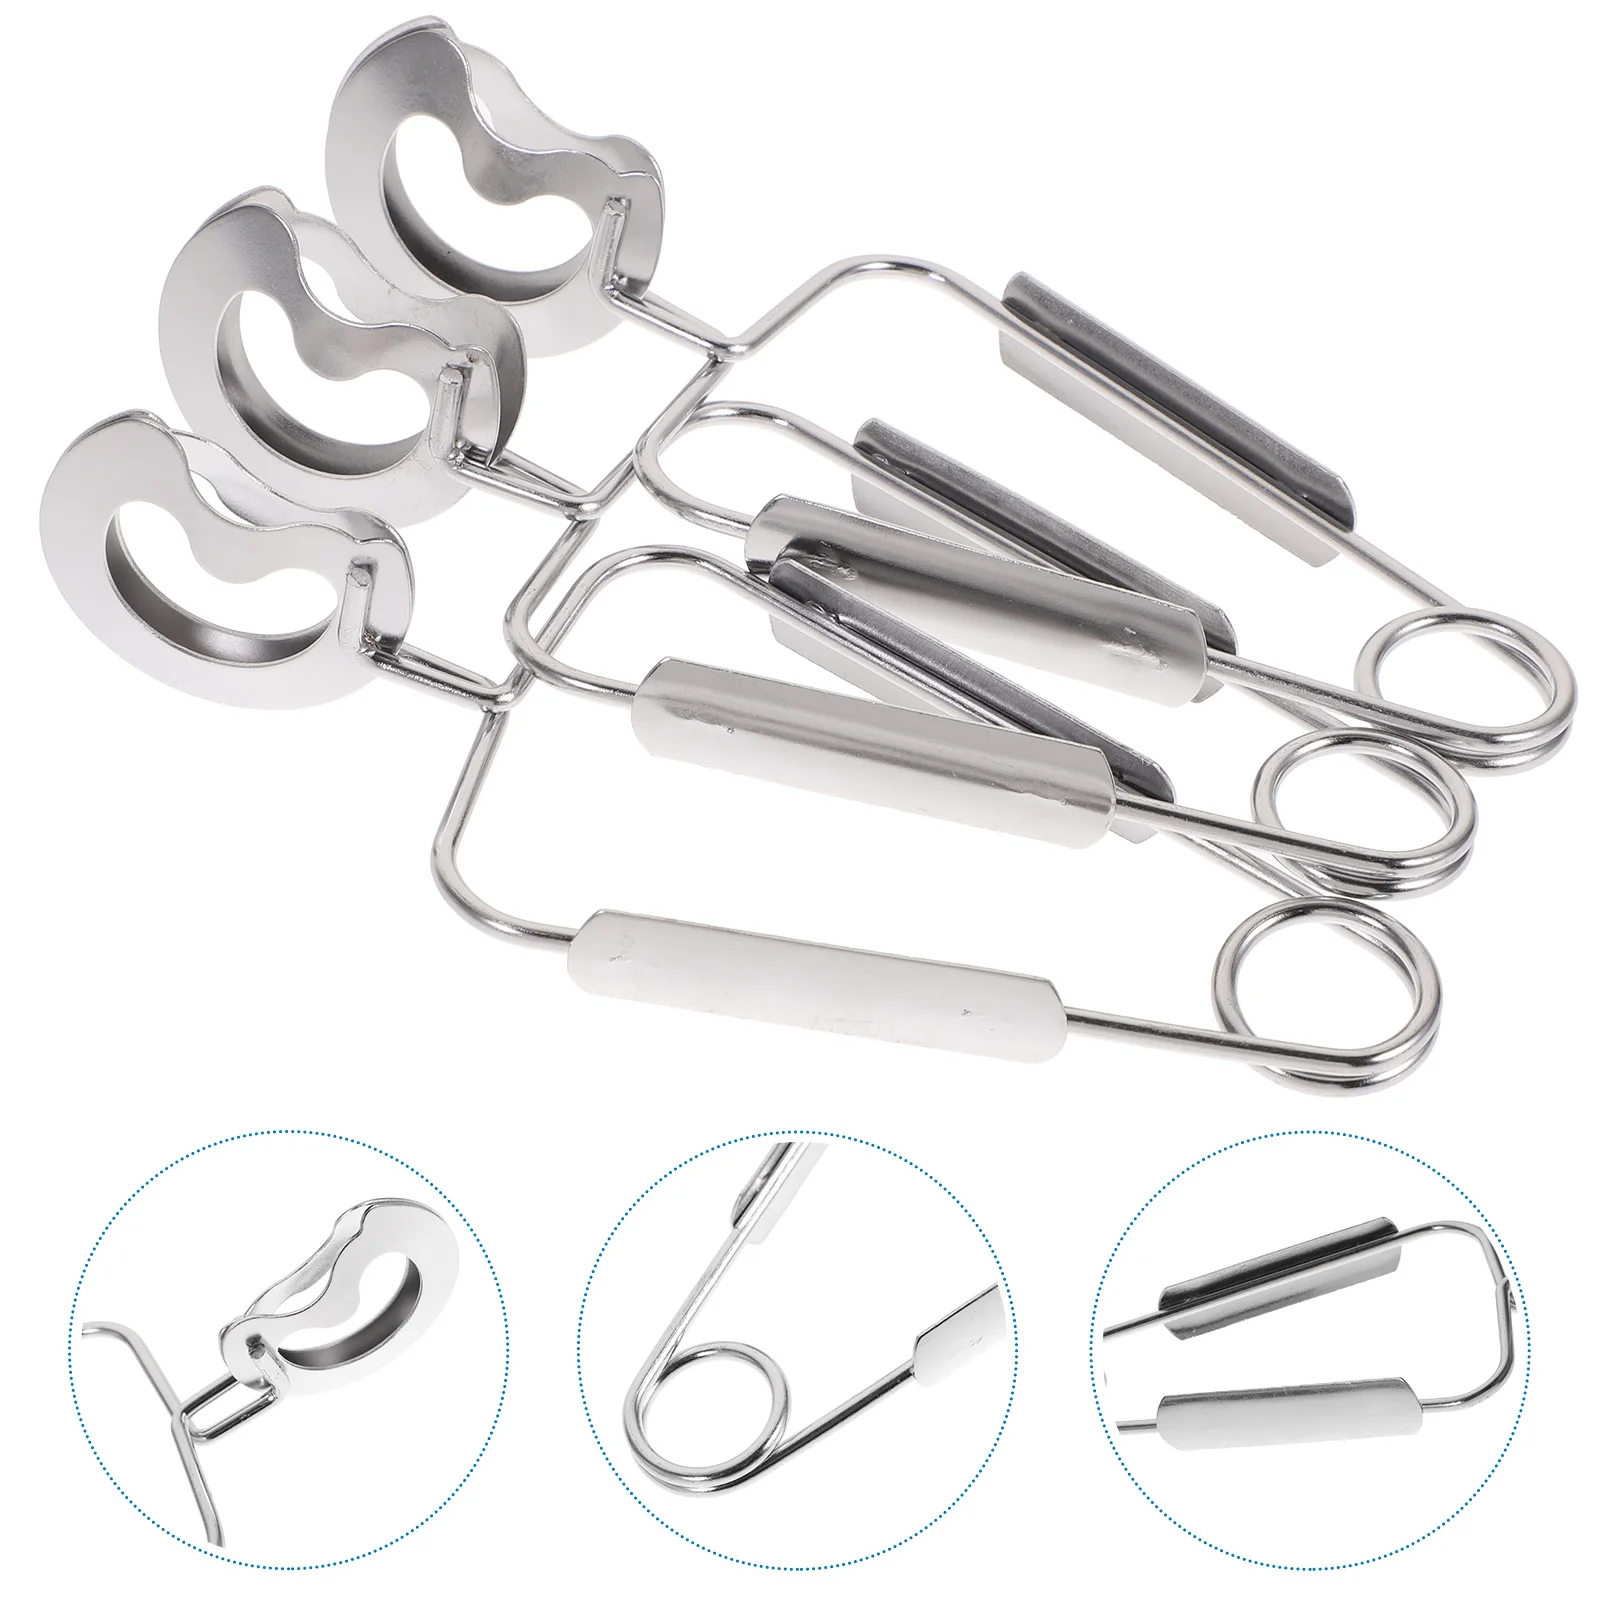 

3 Pcs Stainless Steel Meal Tongs Parrillas Para Asar Carne Multi-function Food Escargot Snail Clip Kitchen Pliers Tools